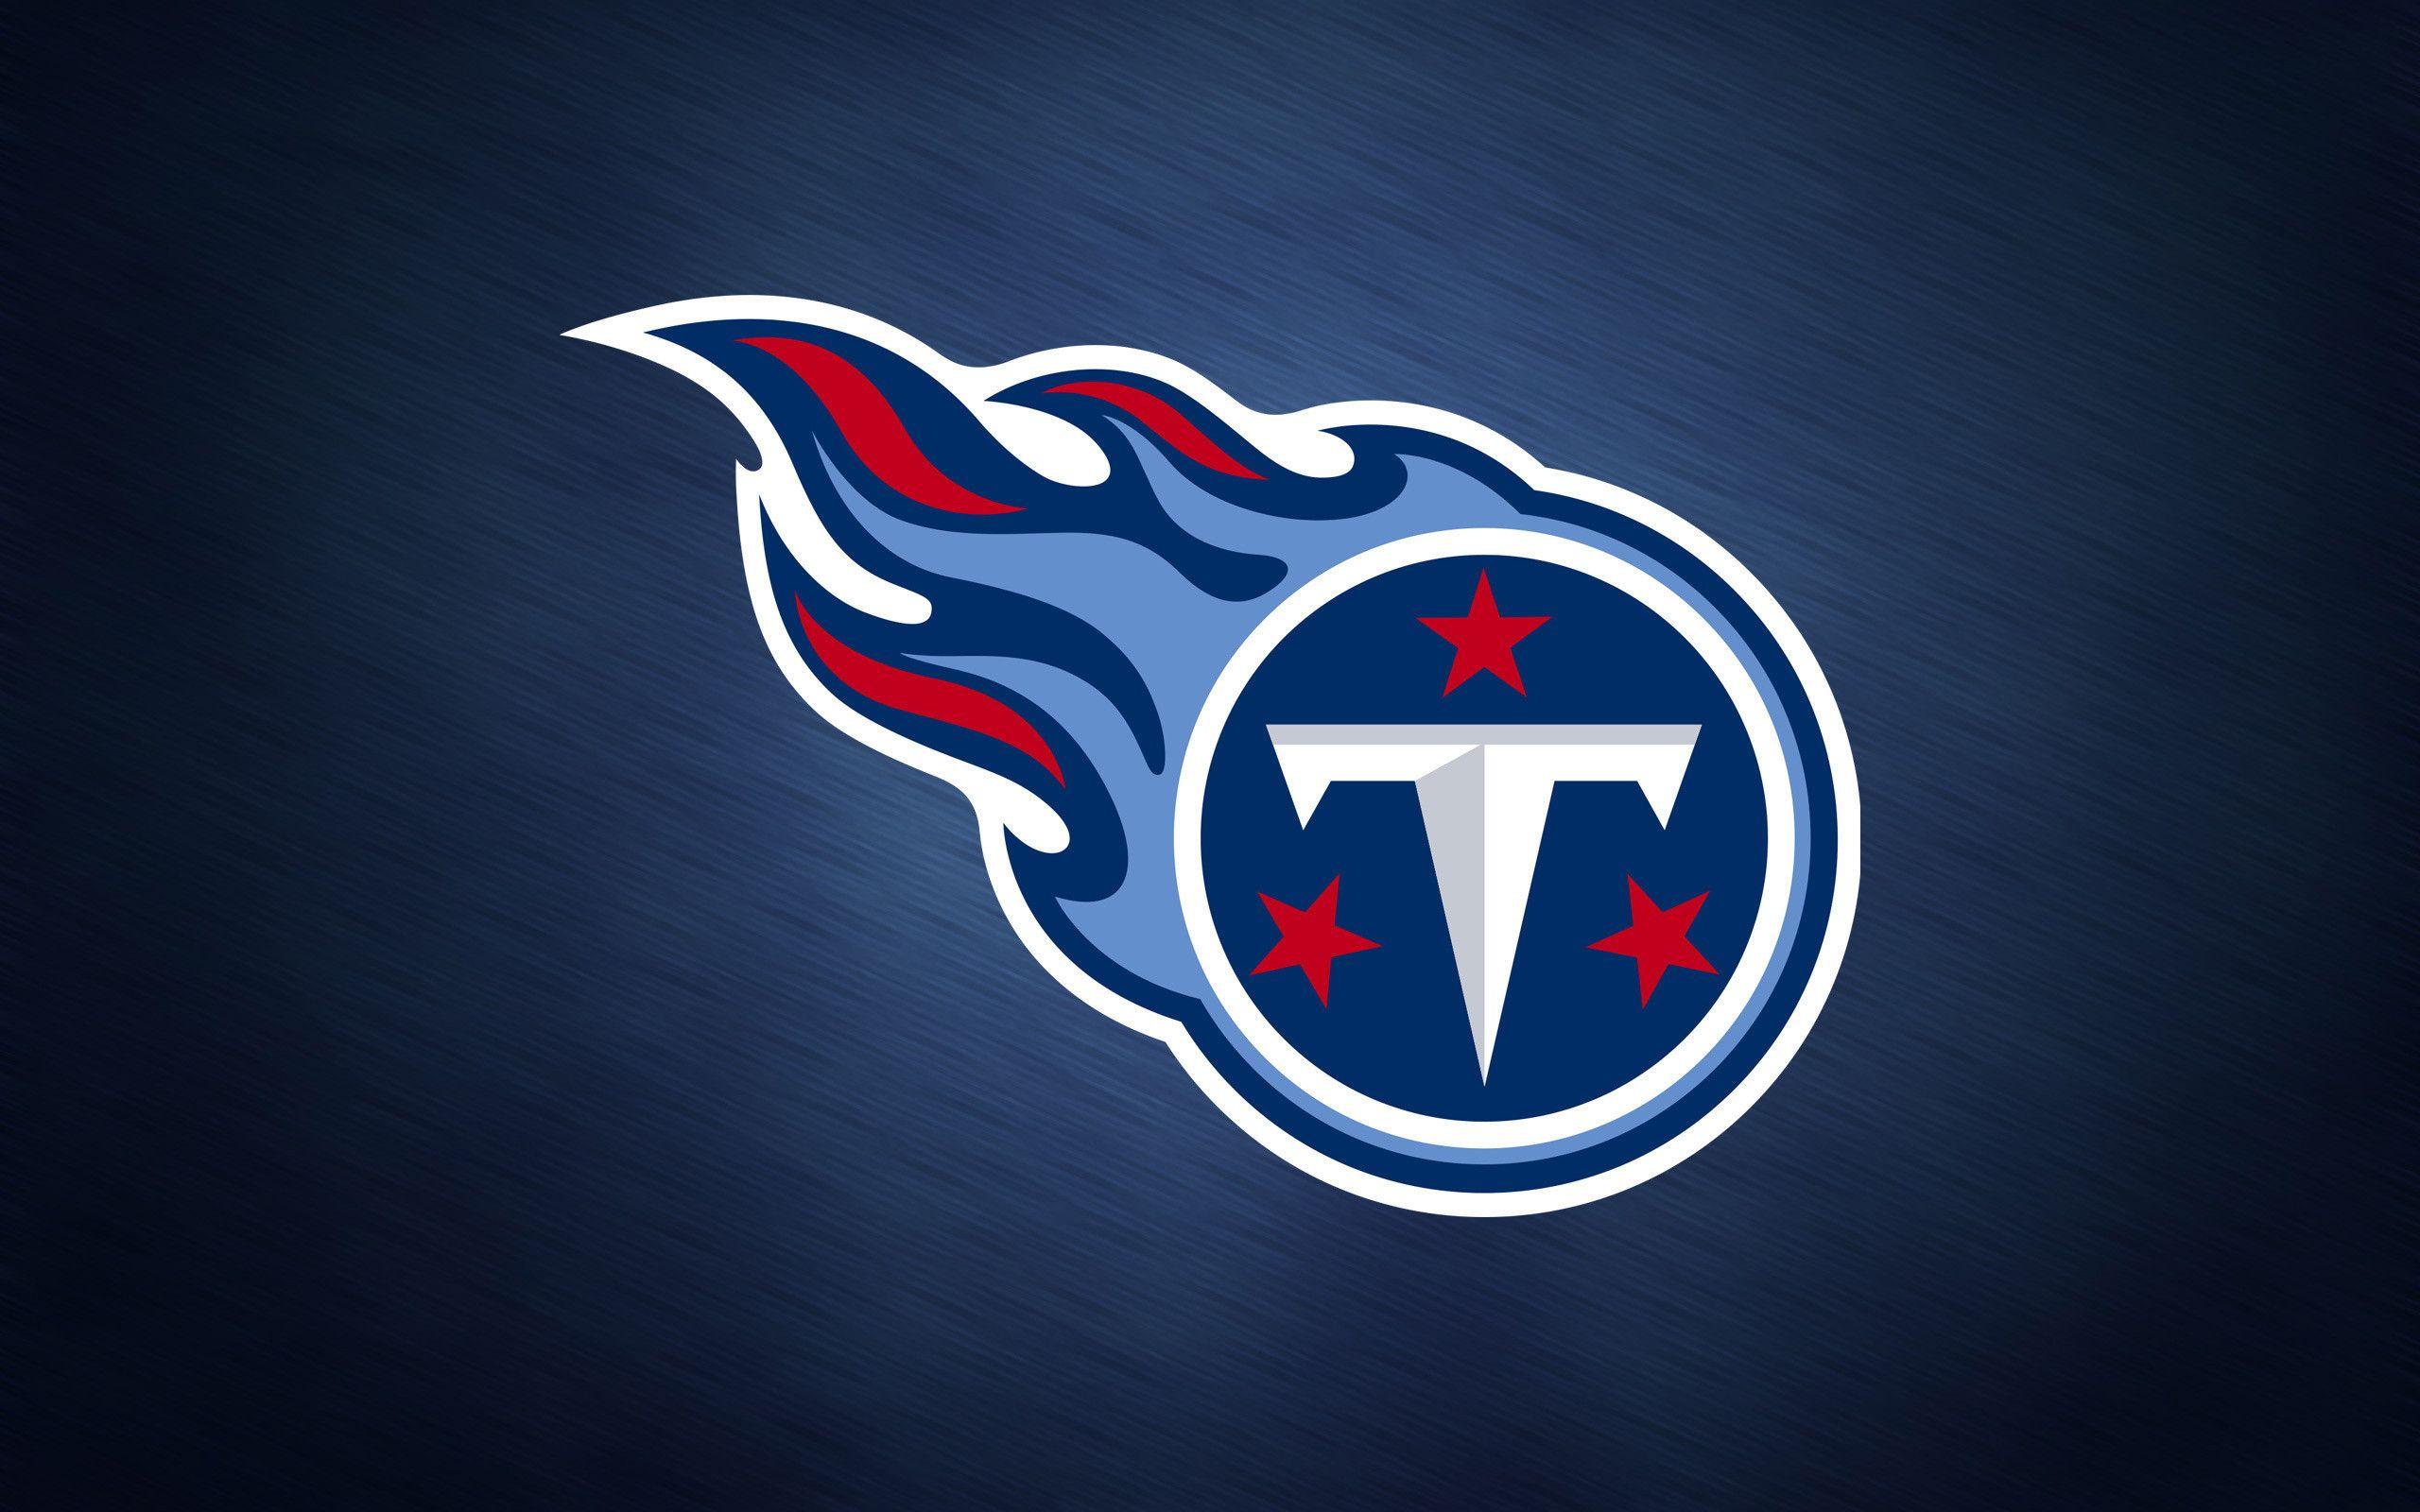 Tennessee Titans 2014 NFL Logo Wallpaper Wide or HD. Sports